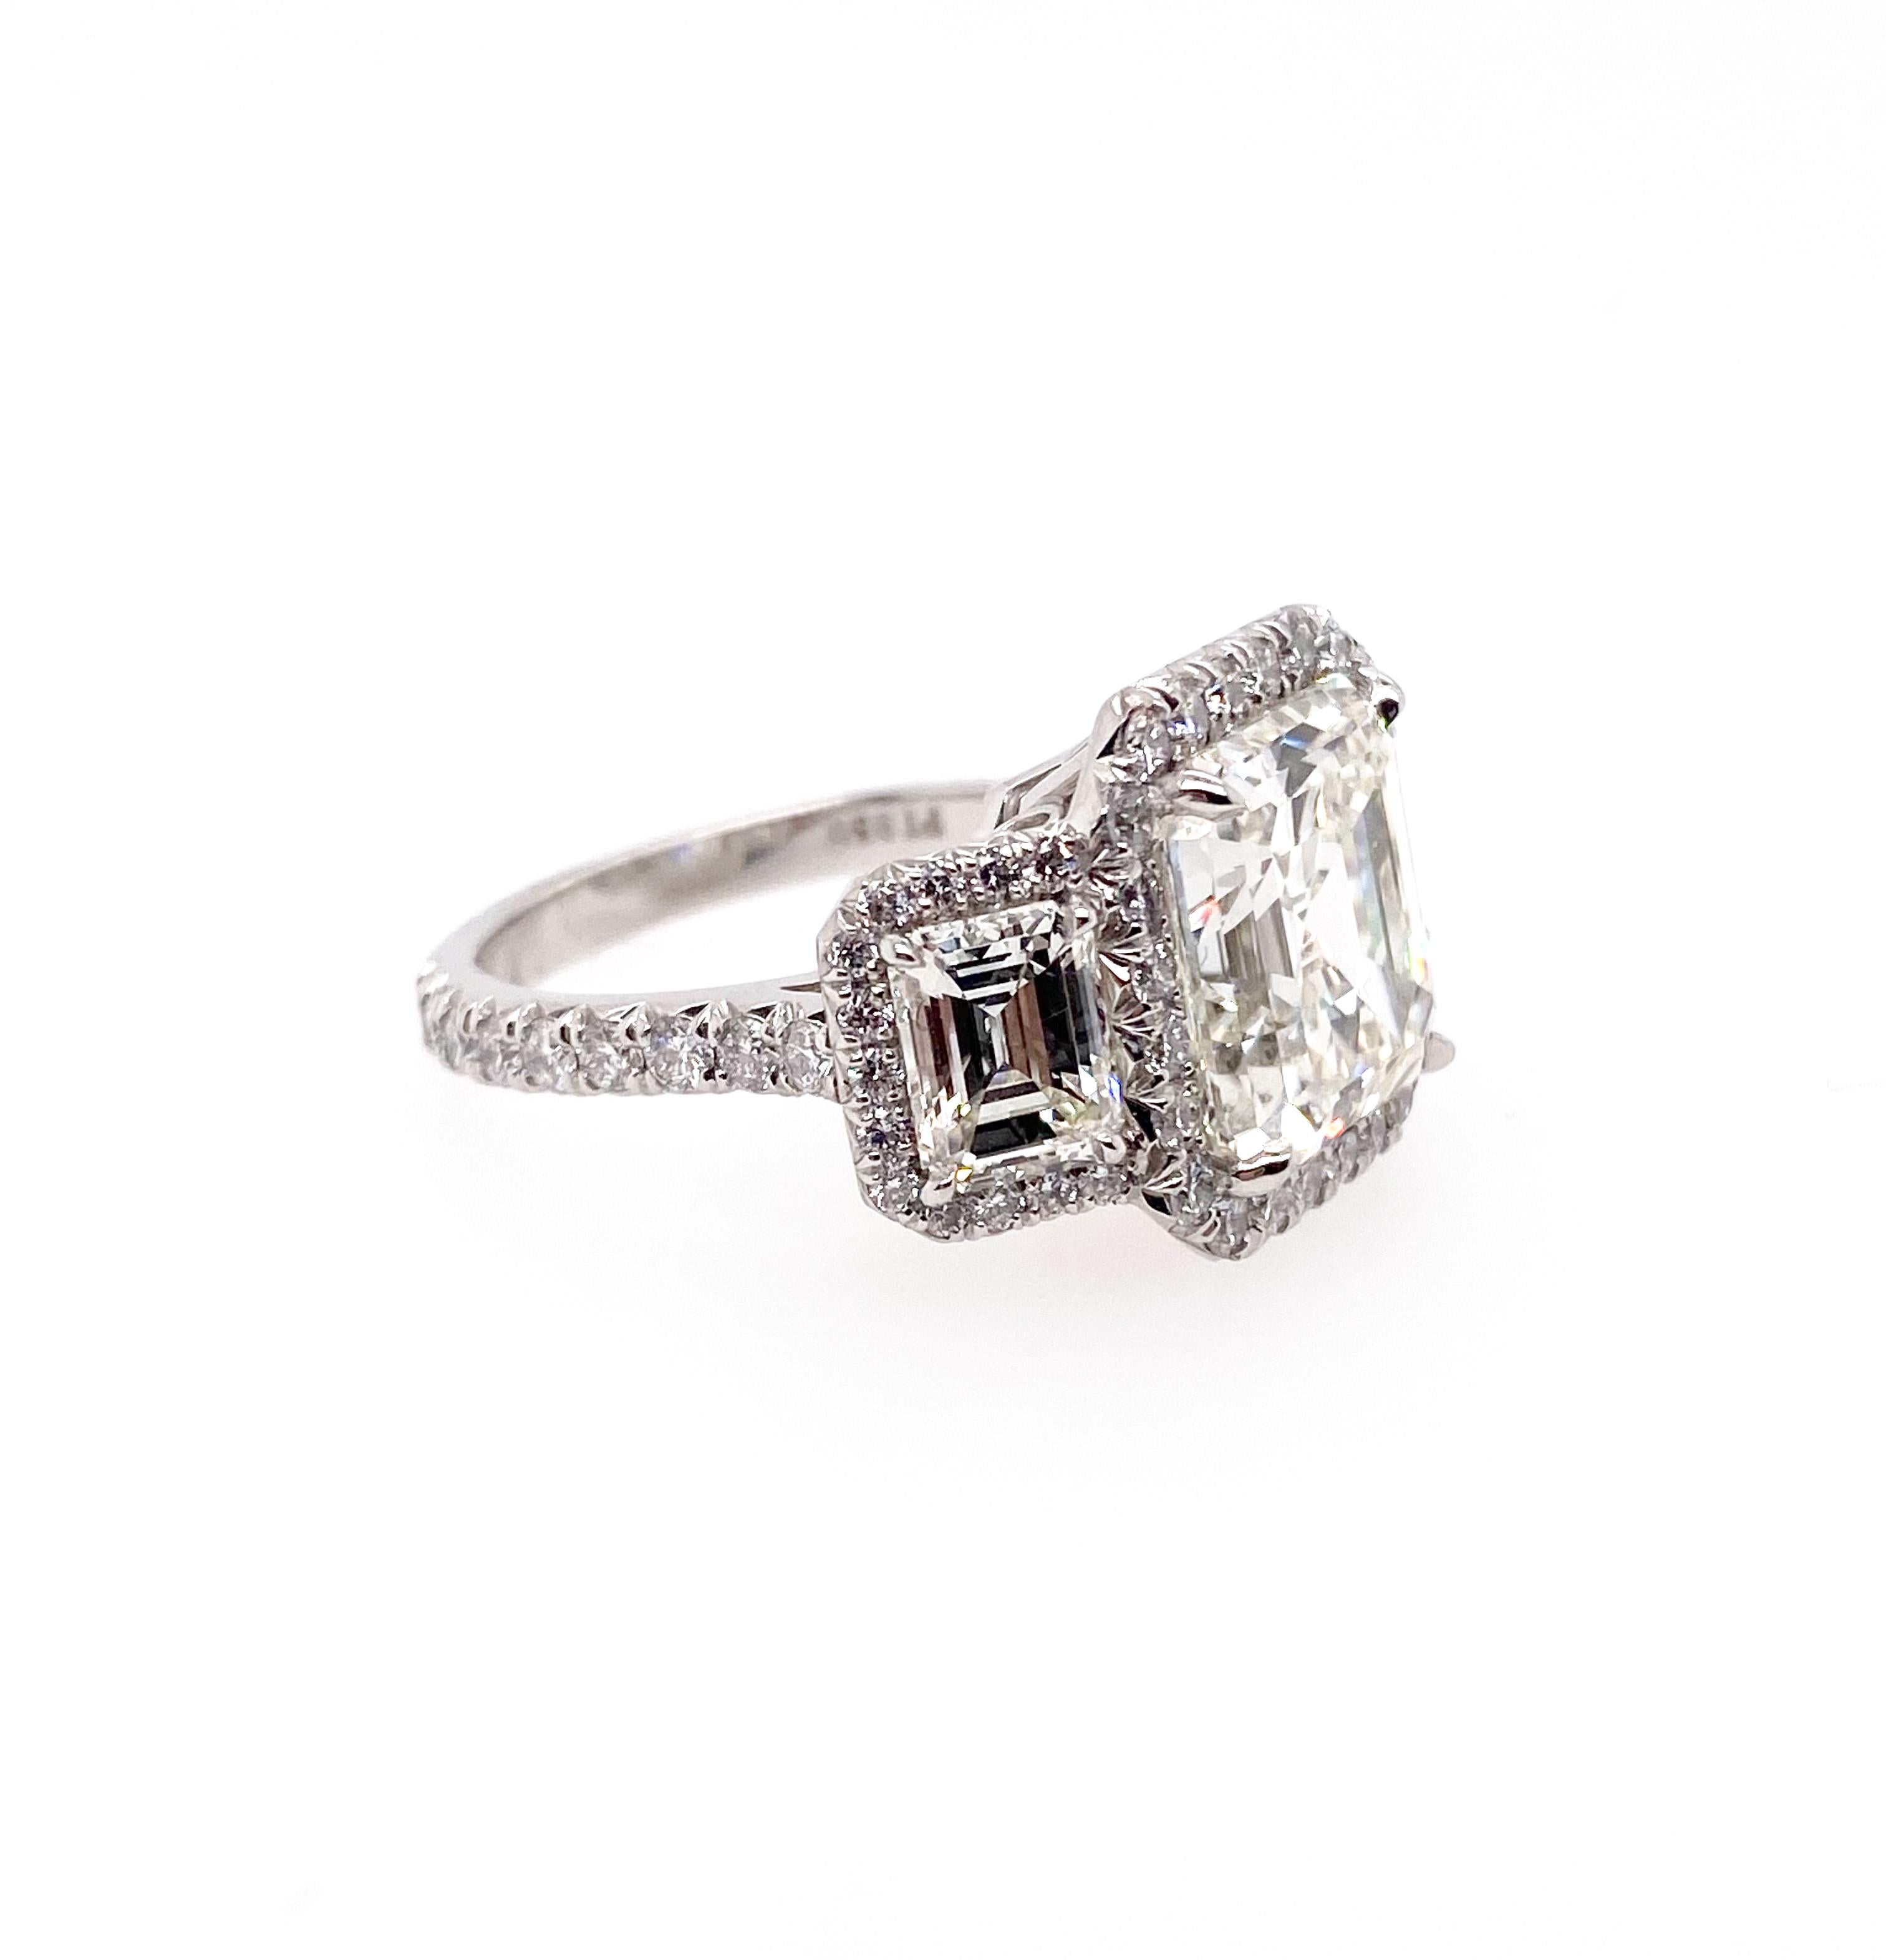 Beautiful GIA Certified 6.13carat Asscher cut diamond mounted in Platinum ring as a center stone. It is set with two GIA certified emerald cut diamonds, 0.90 carat respectively. In additional, the round shape side diamonds 68pc framed that three big